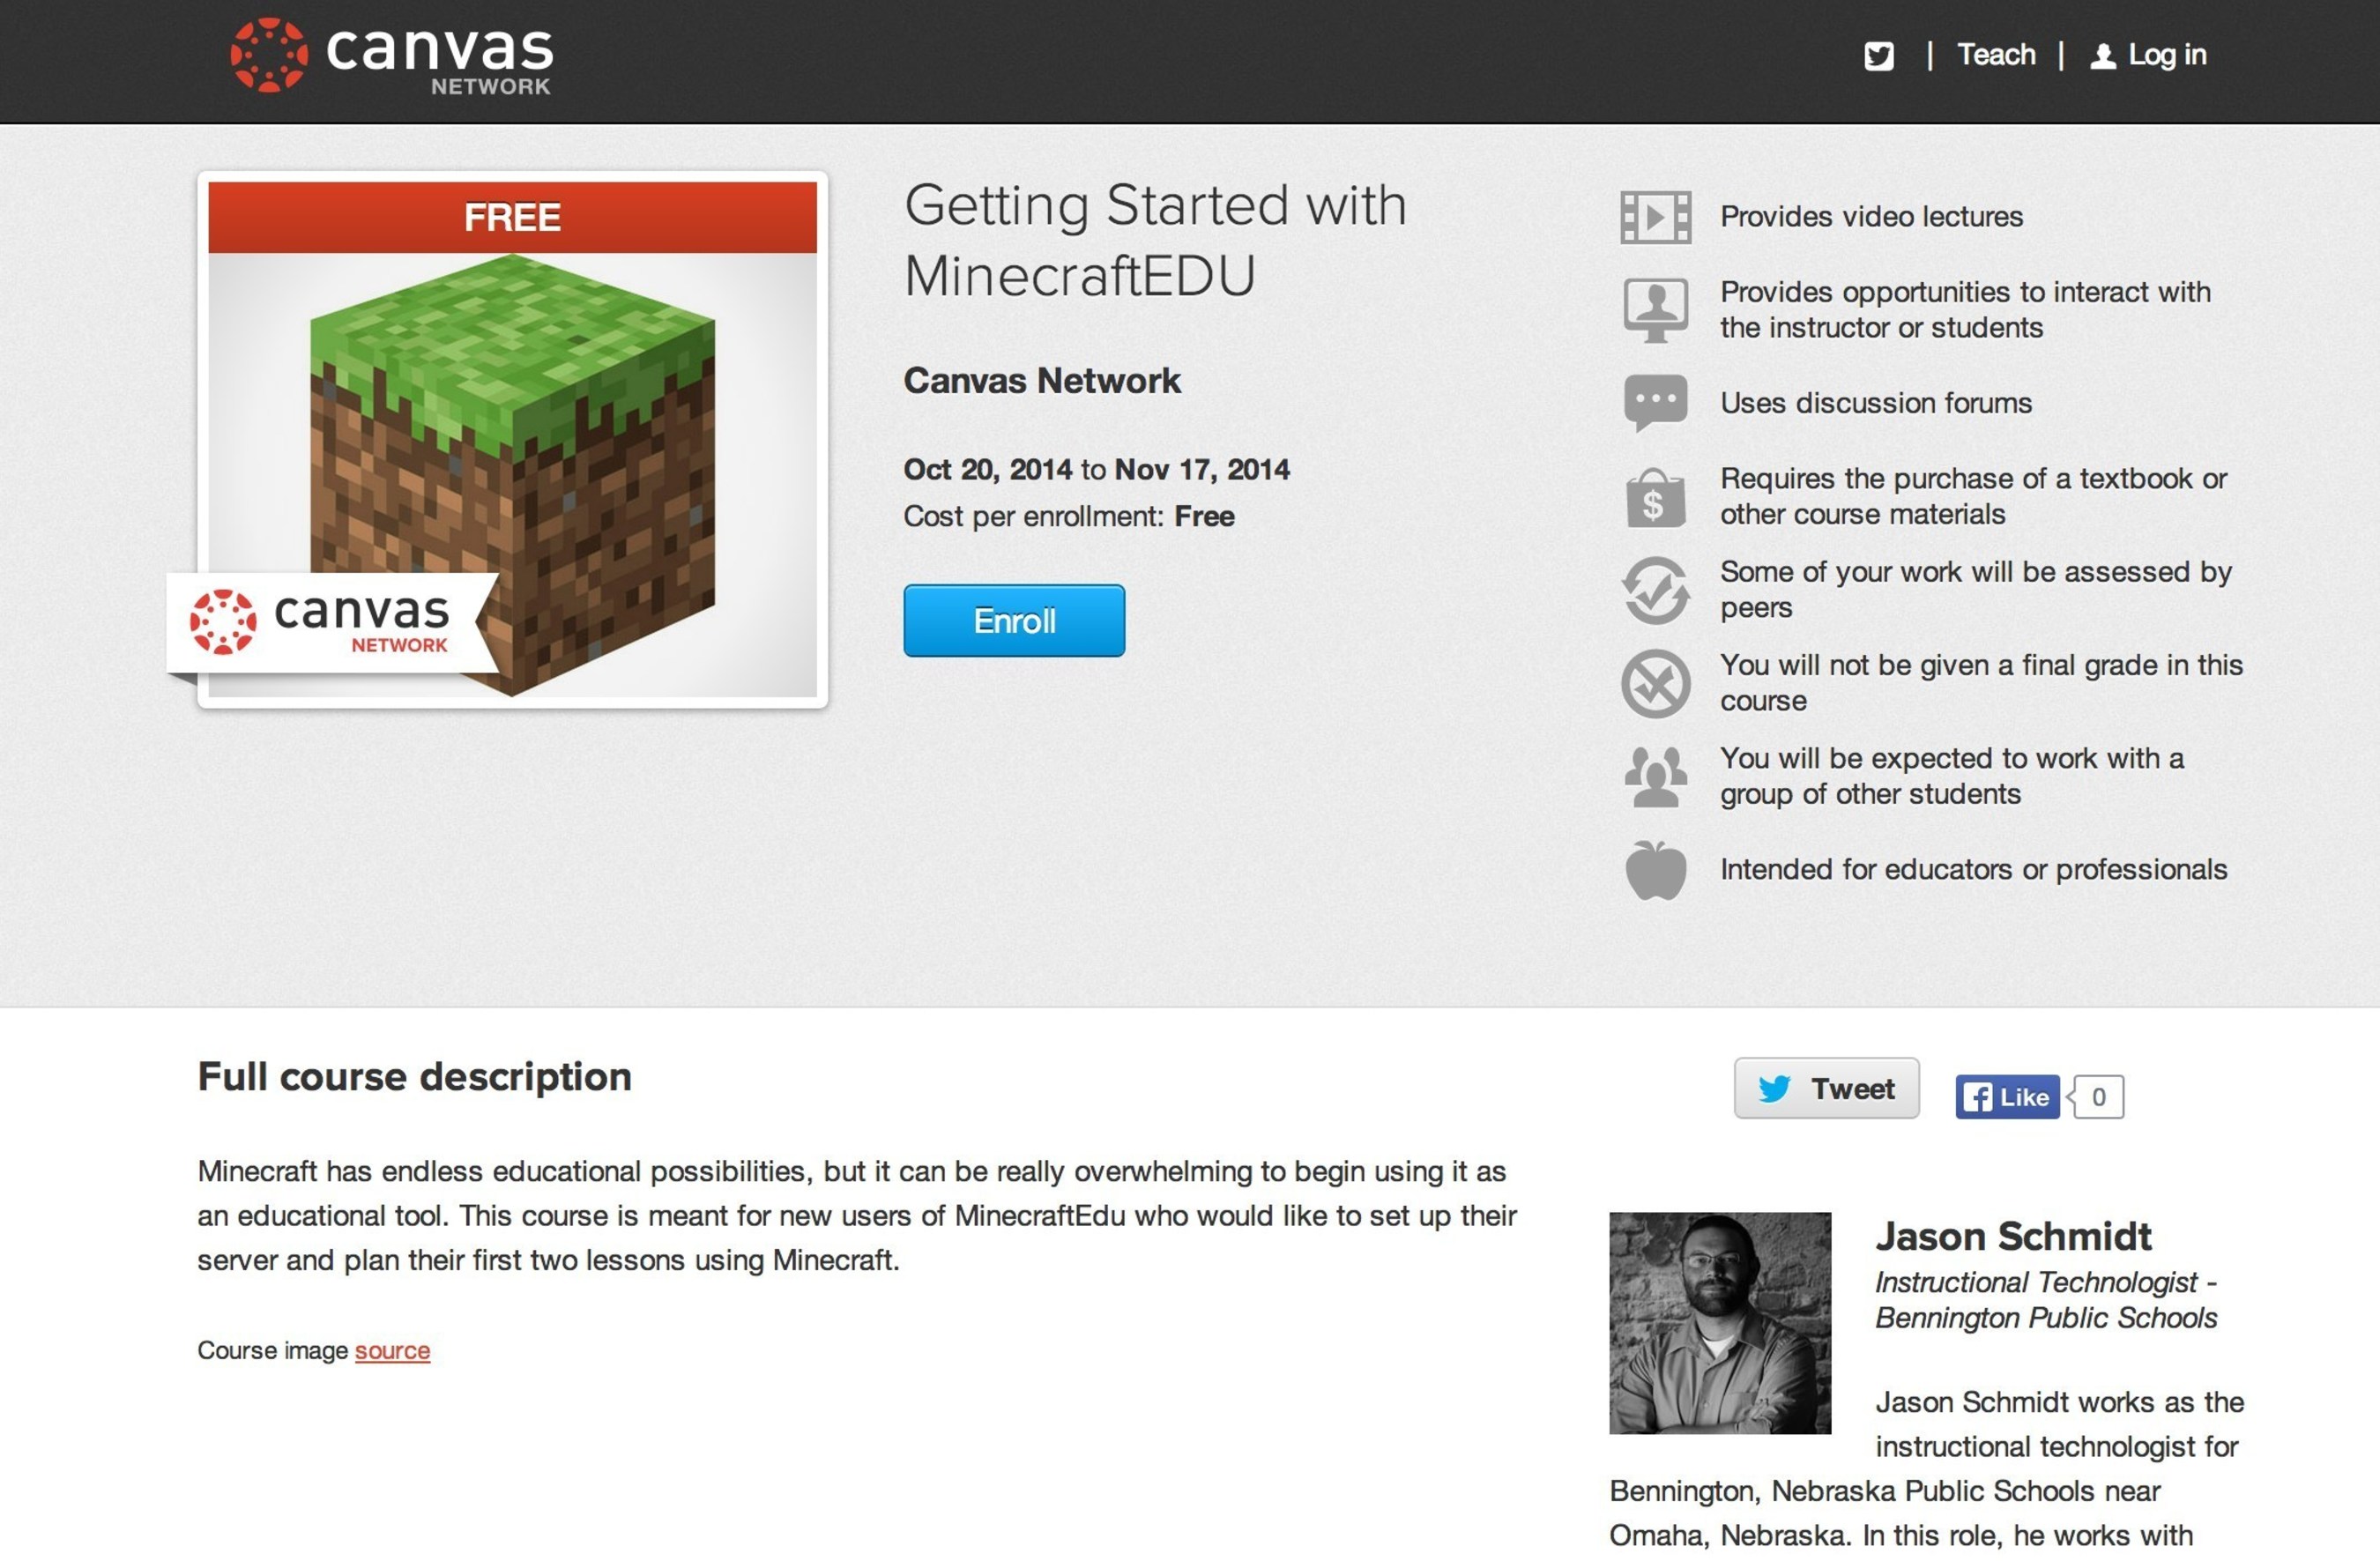 Free Course for Teachers on How to Get Started with MinecraftEDU from Canvas Network by Instructure. (PRNewsFoto/Instructure)